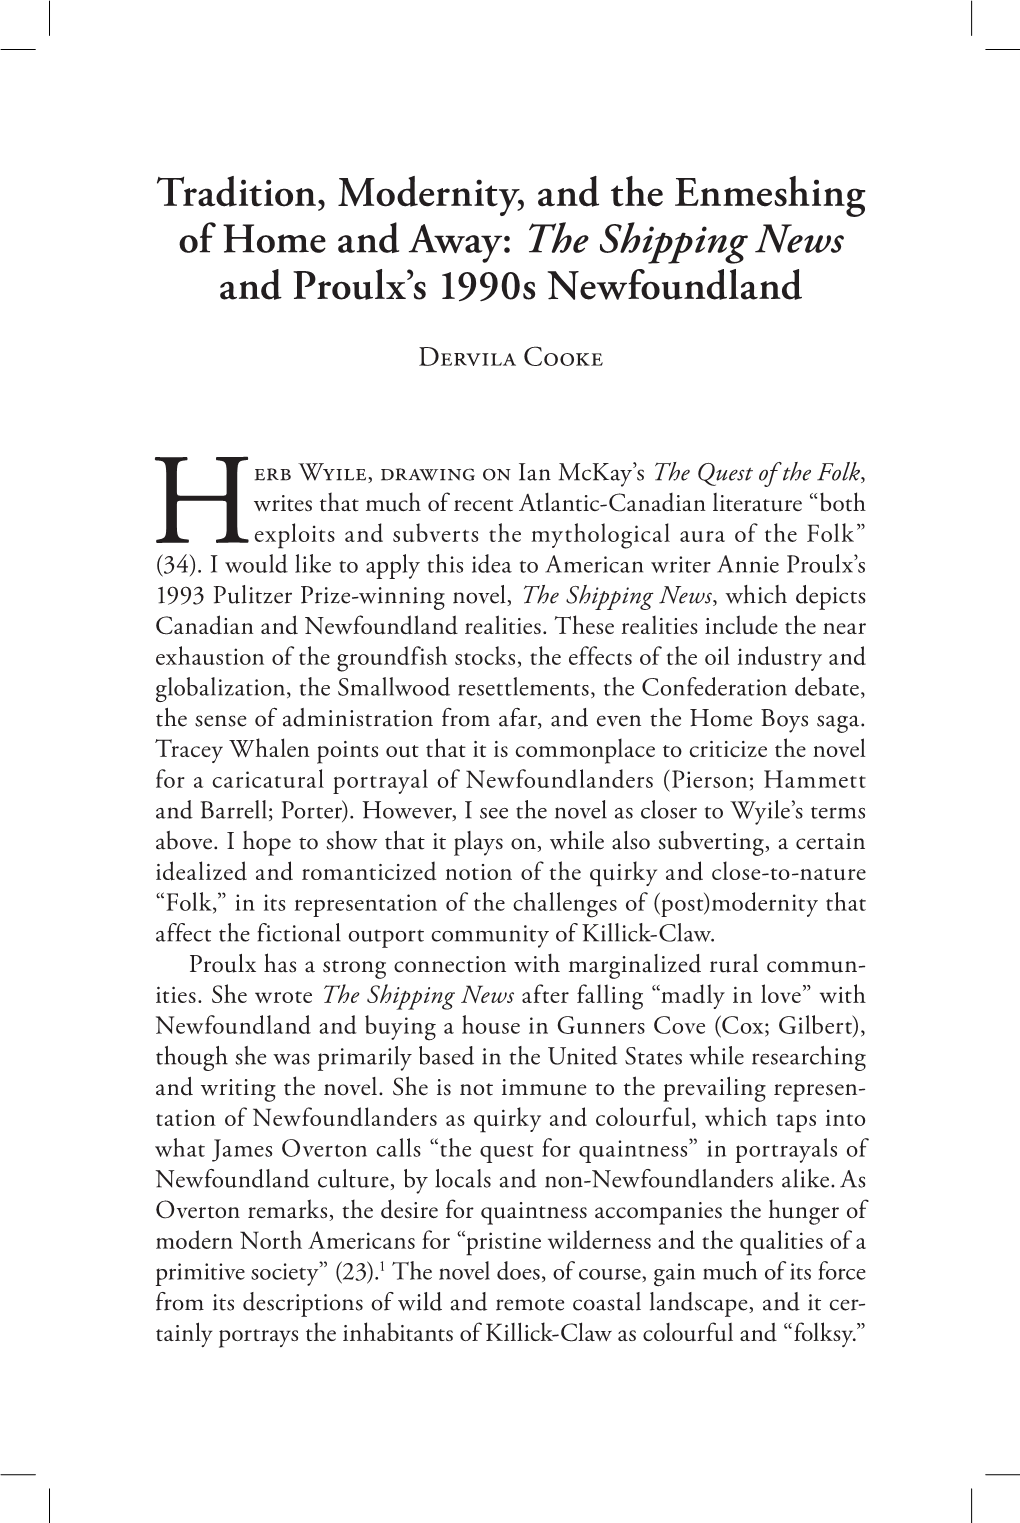 The Shipping News and Proulx's 1990S Newfoundland